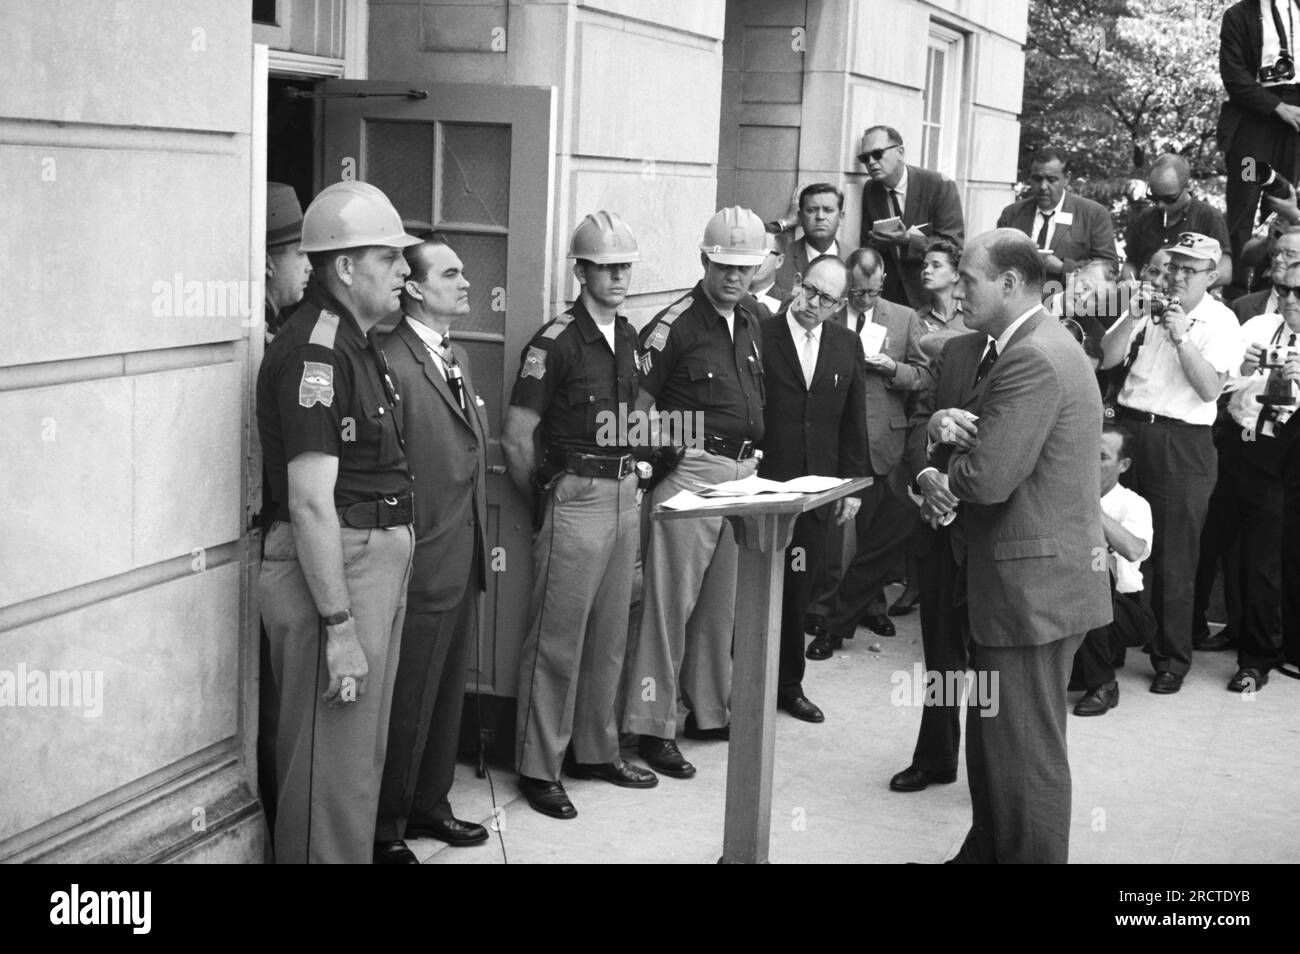 Tuscaloosa, Alabama:  June 11, 1963 Governor George Wallace attempting to block integration at the University of Alabama stands in the door of Foster Auditorium while being confronted by  Deputy U.S. Attorney General Nicholas Katzenbach. Stock Photo